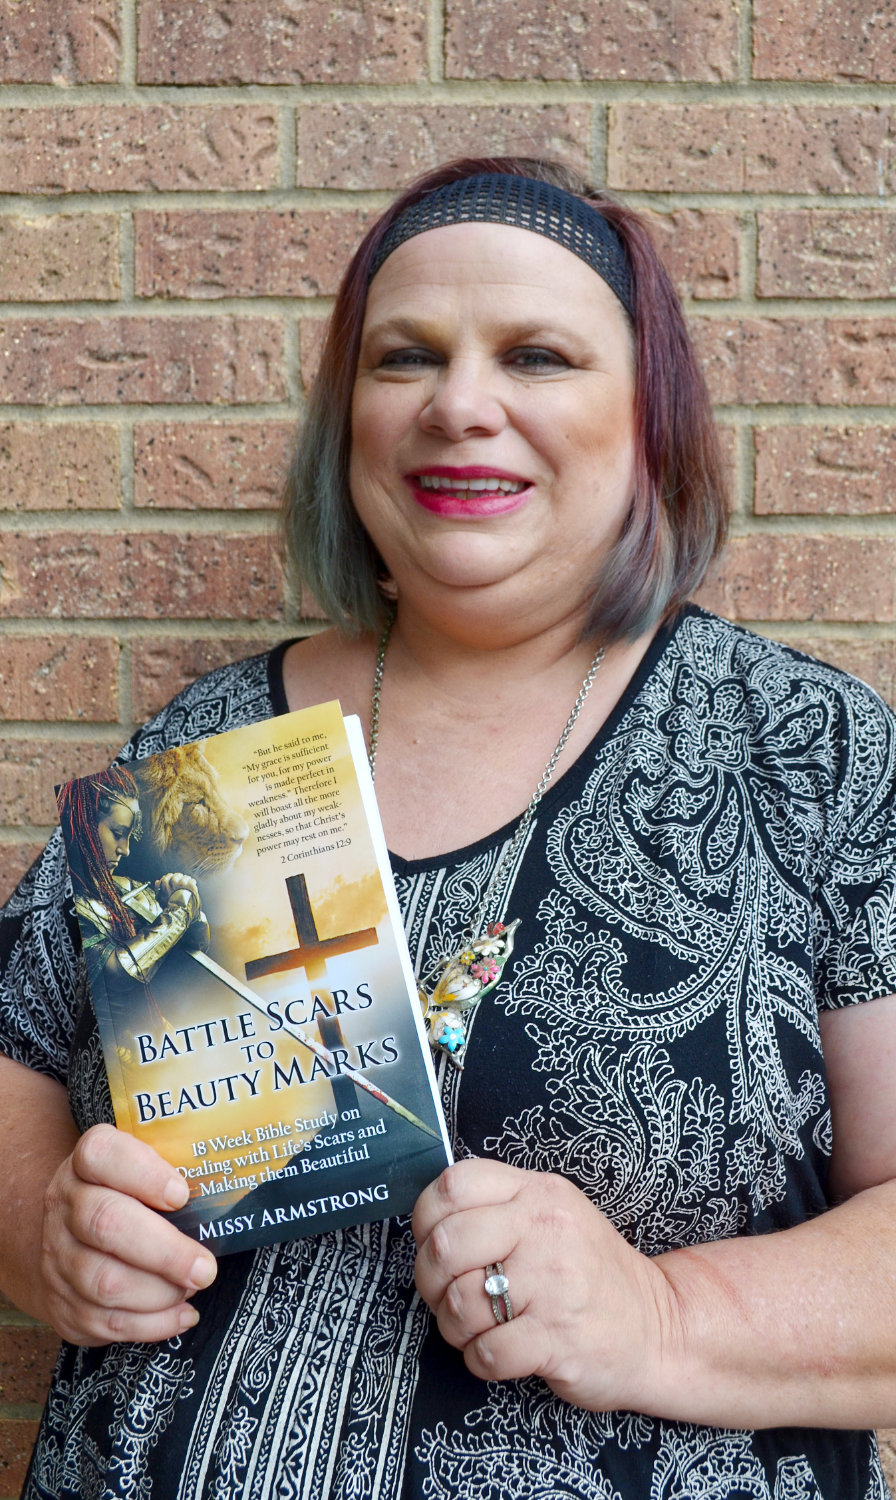 Missy Amrstrong with her new book, “Battle Scars to Beauty Marks.”